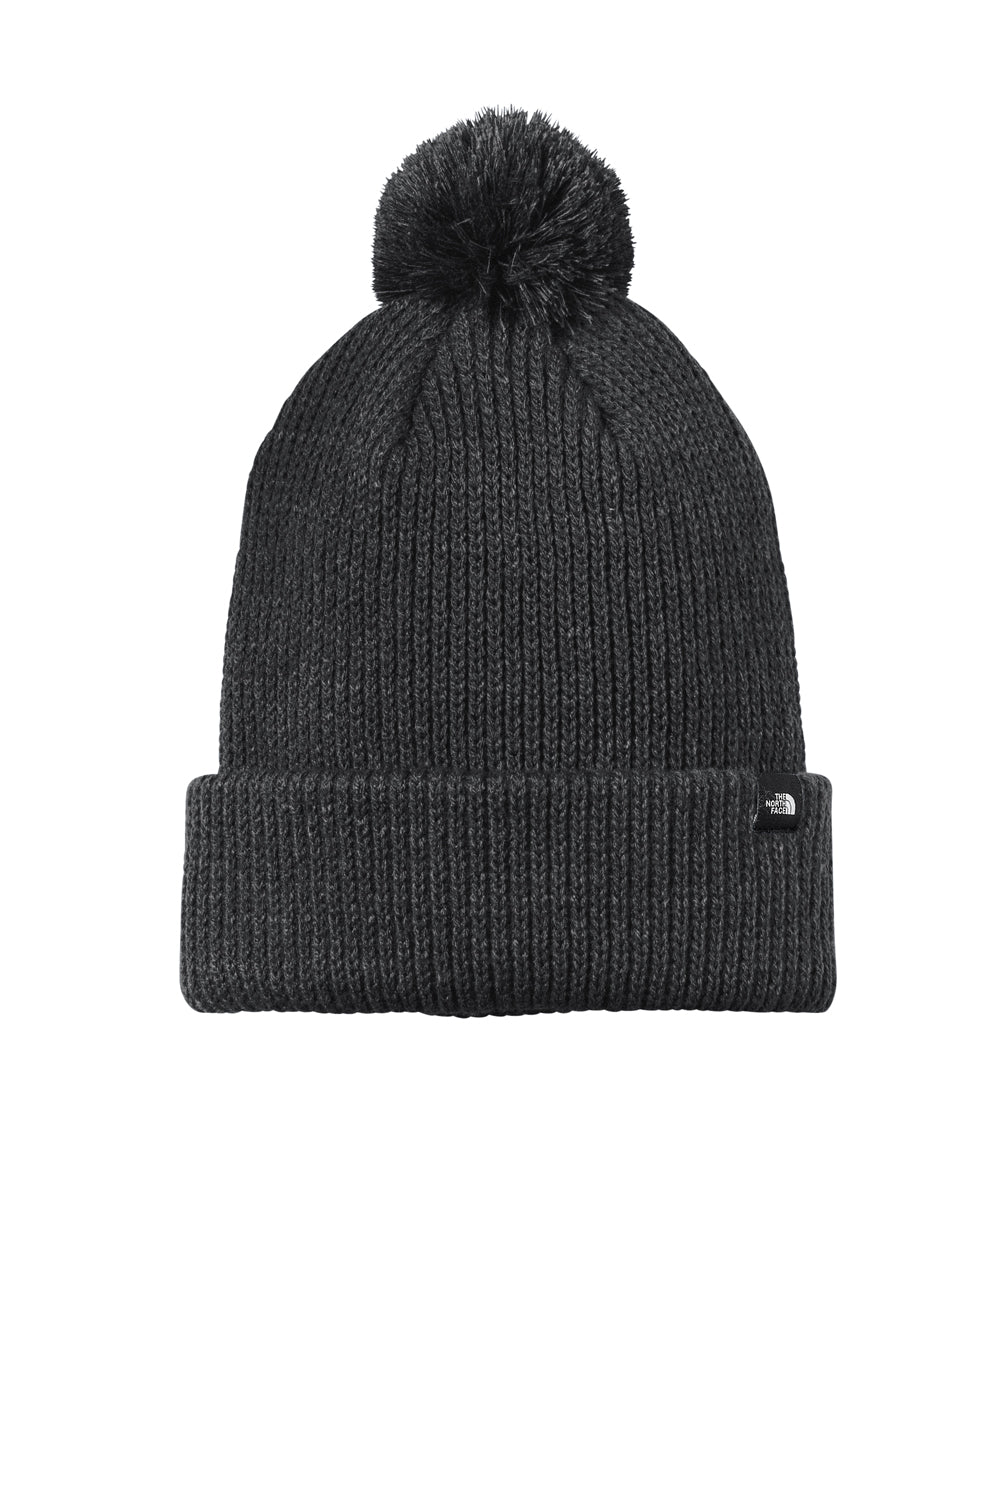 The North Face NF0A7RGI Pom Beanie Heather Black Front